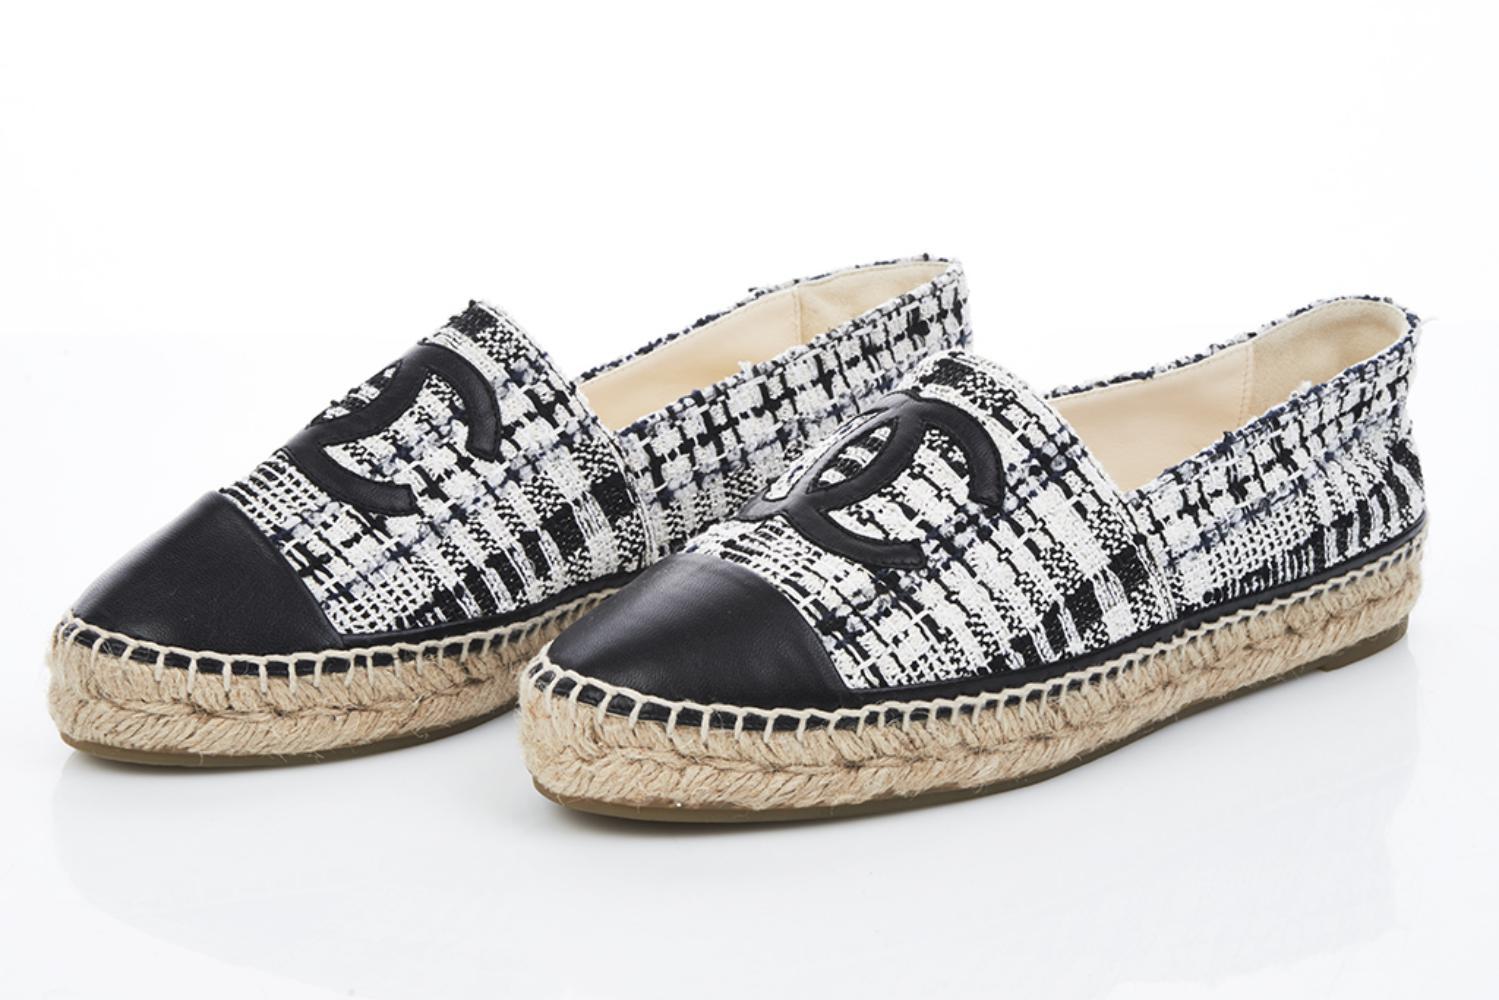 New in box Chanel Espadrilles Size 39 Lambskin shoes 